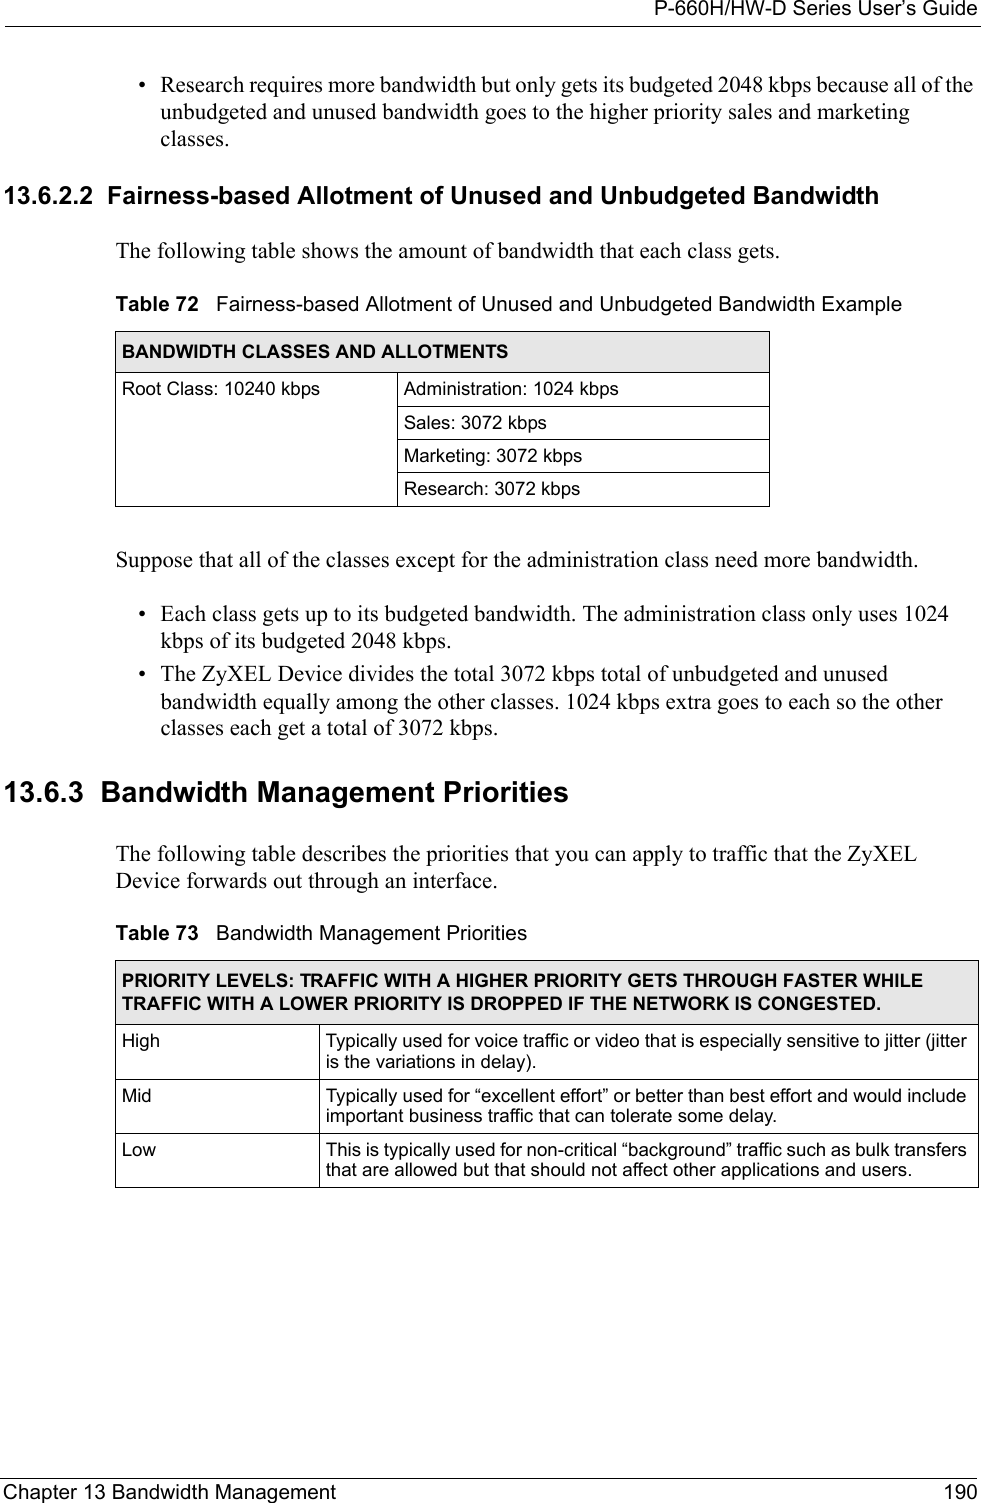 P-660H/HW-D Series User’s GuideChapter 13 Bandwidth Management 190• Research requires more bandwidth but only gets its budgeted 2048 kbps because all of the unbudgeted and unused bandwidth goes to the higher priority sales and marketing classes. 13.6.2.2  Fairness-based Allotment of Unused and Unbudgeted BandwidthThe following table shows the amount of bandwidth that each class gets.Suppose that all of the classes except for the administration class need more bandwidth.• Each class gets up to its budgeted bandwidth. The administration class only uses 1024 kbps of its budgeted 2048 kbps. • The ZyXEL Device divides the total 3072 kbps total of unbudgeted and unused bandwidth equally among the other classes. 1024 kbps extra goes to each so the other classes each get a total of 3072 kbps. 13.6.3  Bandwidth Management PrioritiesThe following table describes the priorities that you can apply to traffic that the ZyXEL Device forwards out through an interface.Table 72   Fairness-based Allotment of Unused and Unbudgeted Bandwidth ExampleBANDWIDTH CLASSES AND ALLOTMENTSRoot Class: 10240 kbps Administration: 1024 kbpsSales: 3072 kbpsMarketing: 3072 kbpsResearch: 3072 kbpsTable 73   Bandwidth Management PrioritiesPRIORITY LEVELS: TRAFFIC WITH A HIGHER PRIORITY GETS THROUGH FASTER WHILE TRAFFIC WITH A LOWER PRIORITY IS DROPPED IF THE NETWORK IS CONGESTED.High Typically used for voice traffic or video that is especially sensitive to jitter (jitter is the variations in delay).Mid  Typically used for “excellent effort” or better than best effort and would include important business traffic that can tolerate some delay.Low This is typically used for non-critical “background” traffic such as bulk transfers that are allowed but that should not affect other applications and users. 